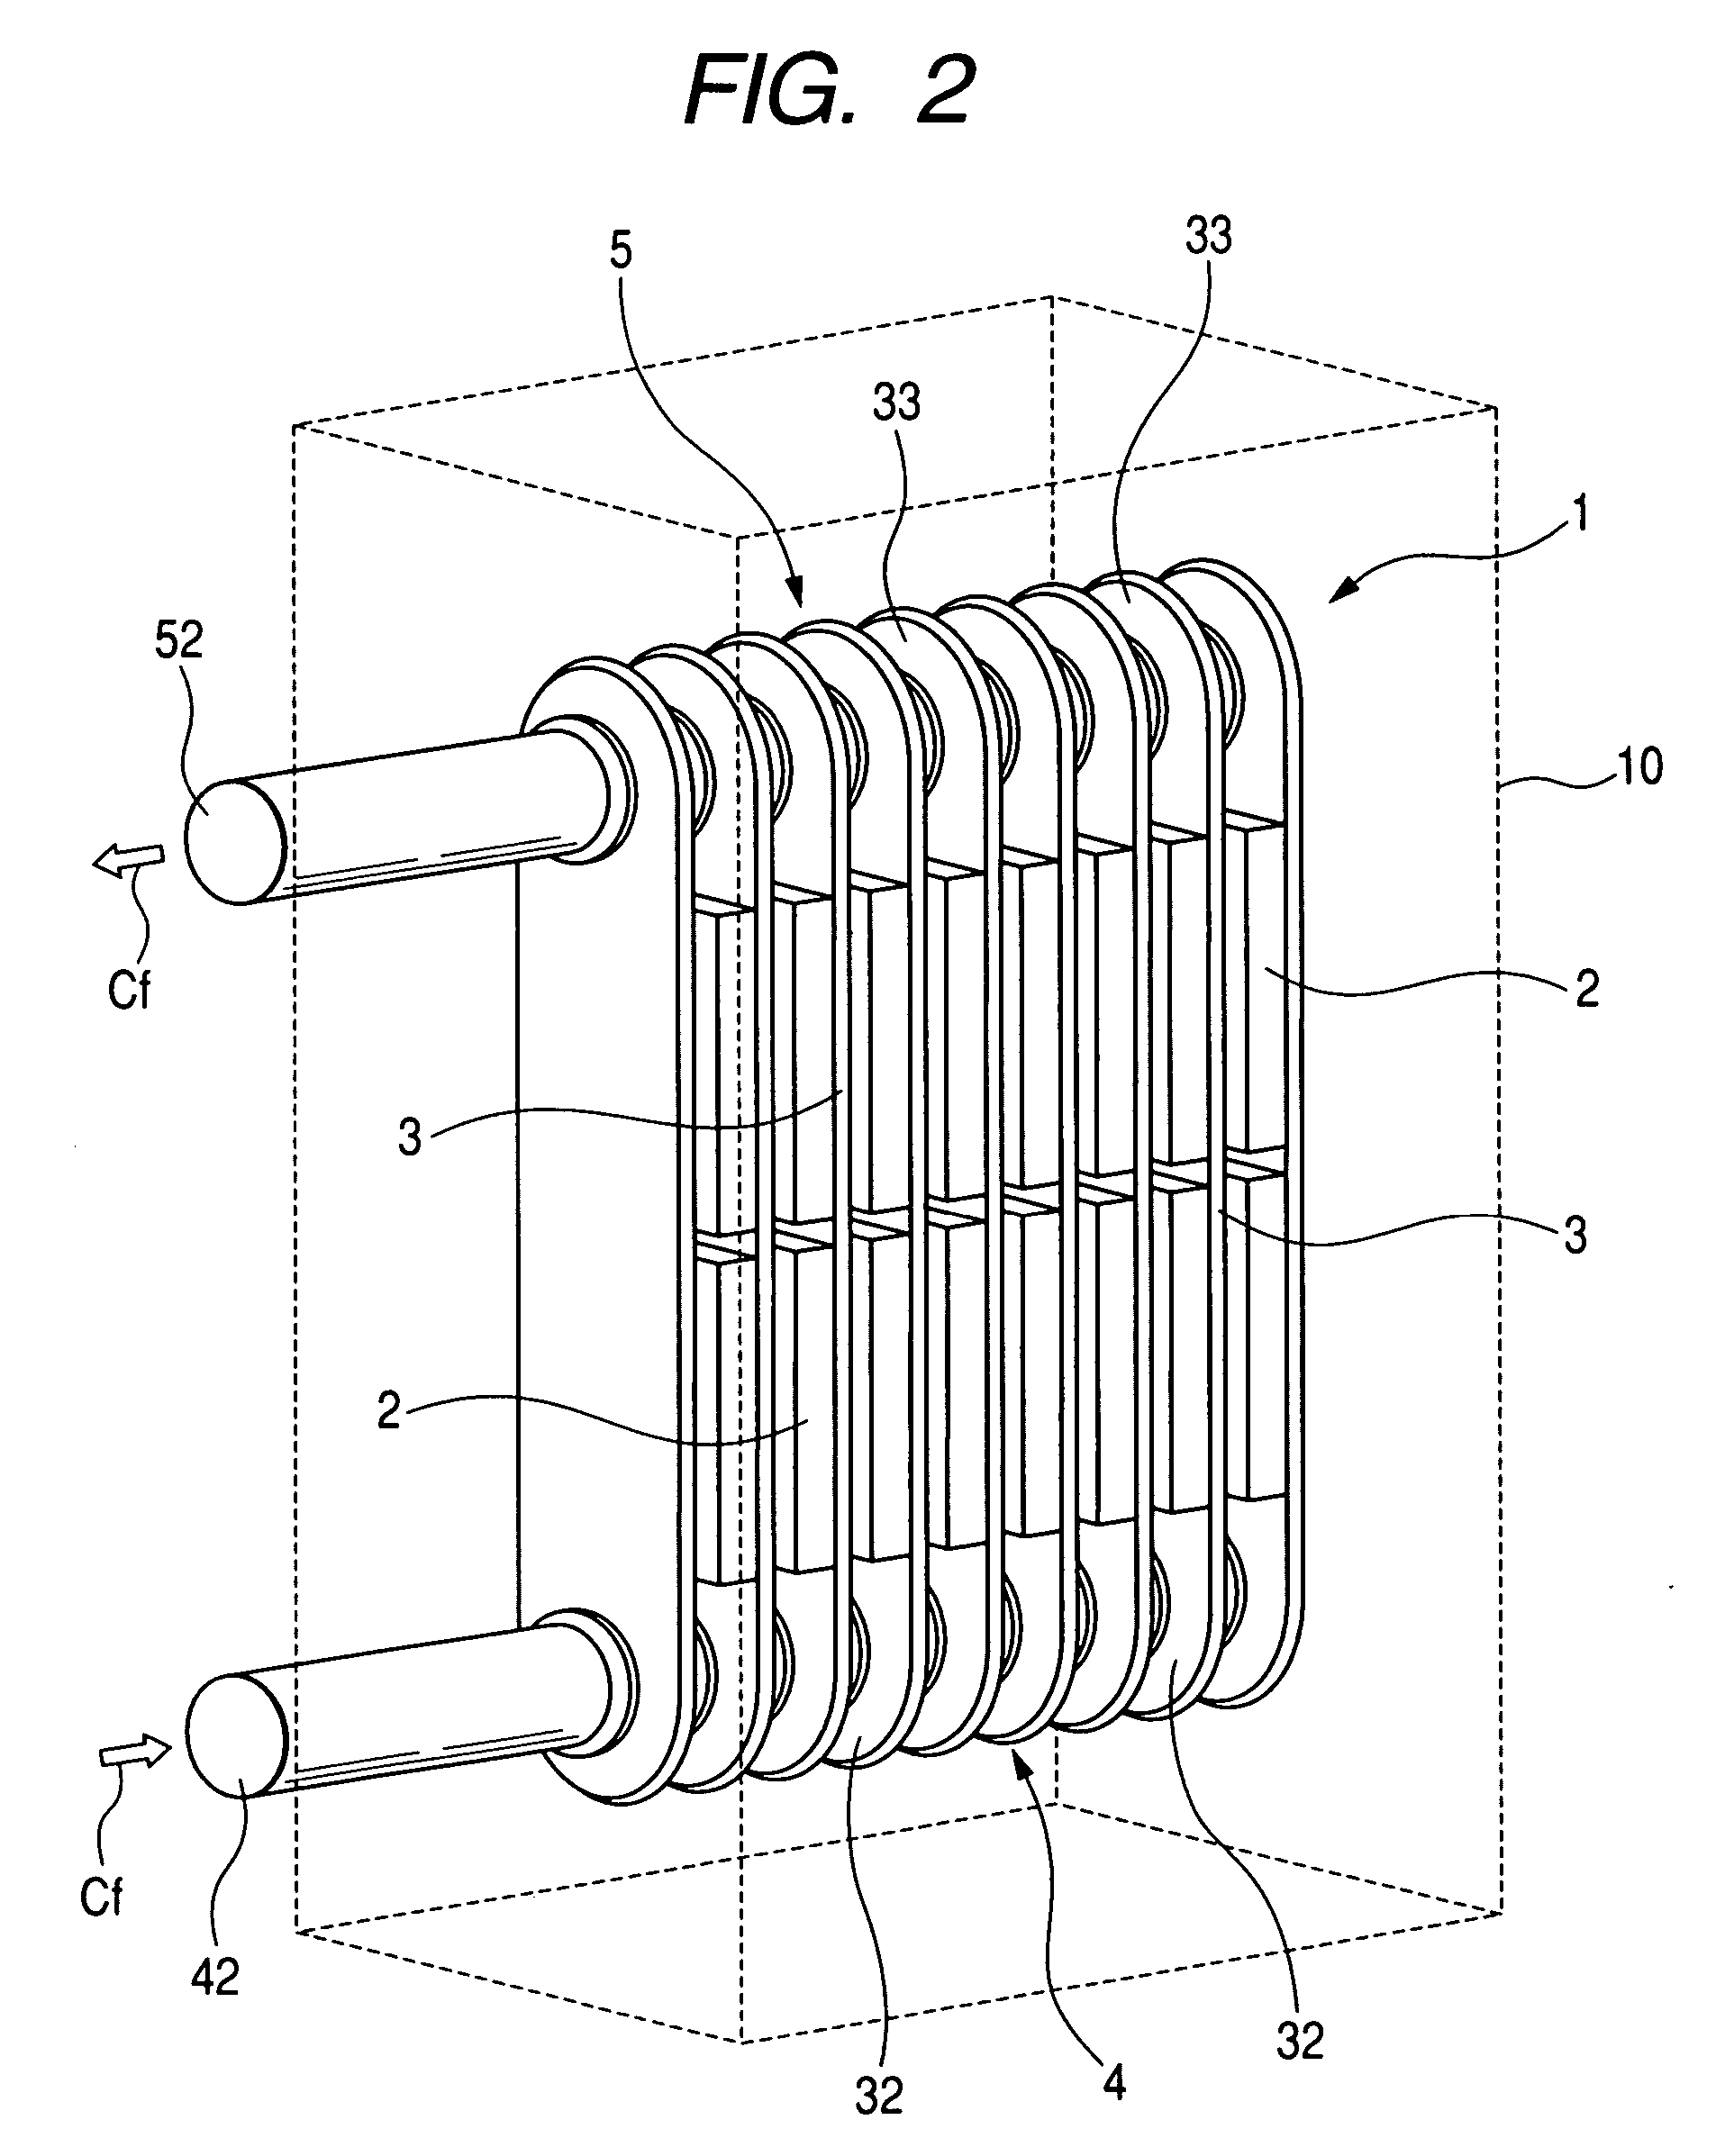 Liquid-cooled semiconductor unit for cooling high-power semiconductor elements that are enclosed in modules